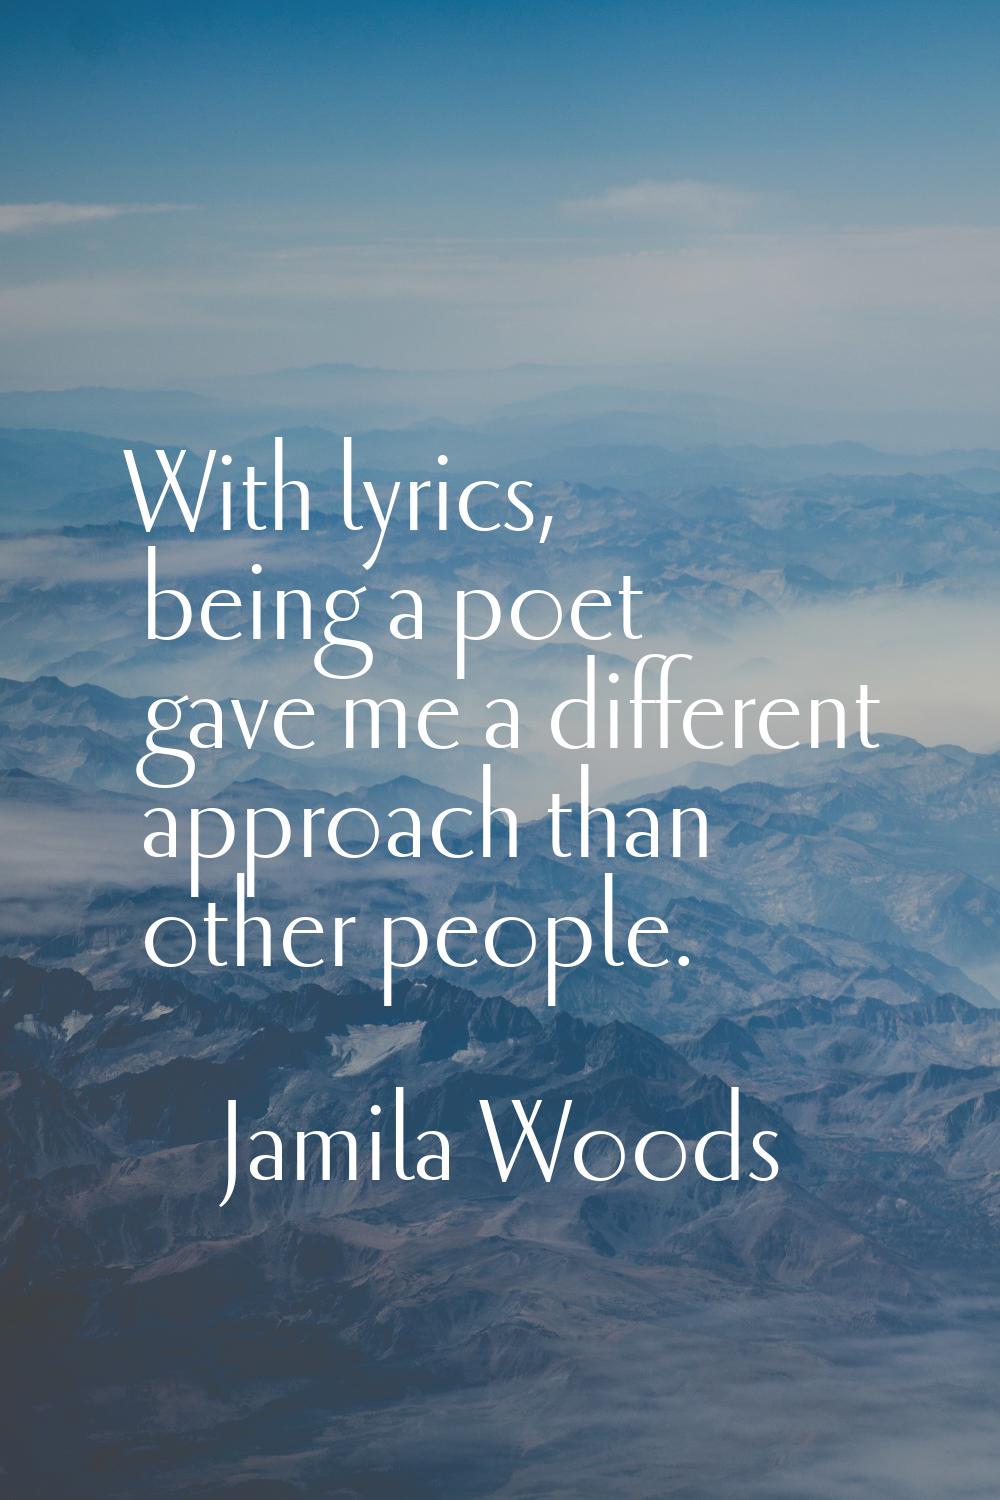 With lyrics, being a poet gave me a different approach than other people.